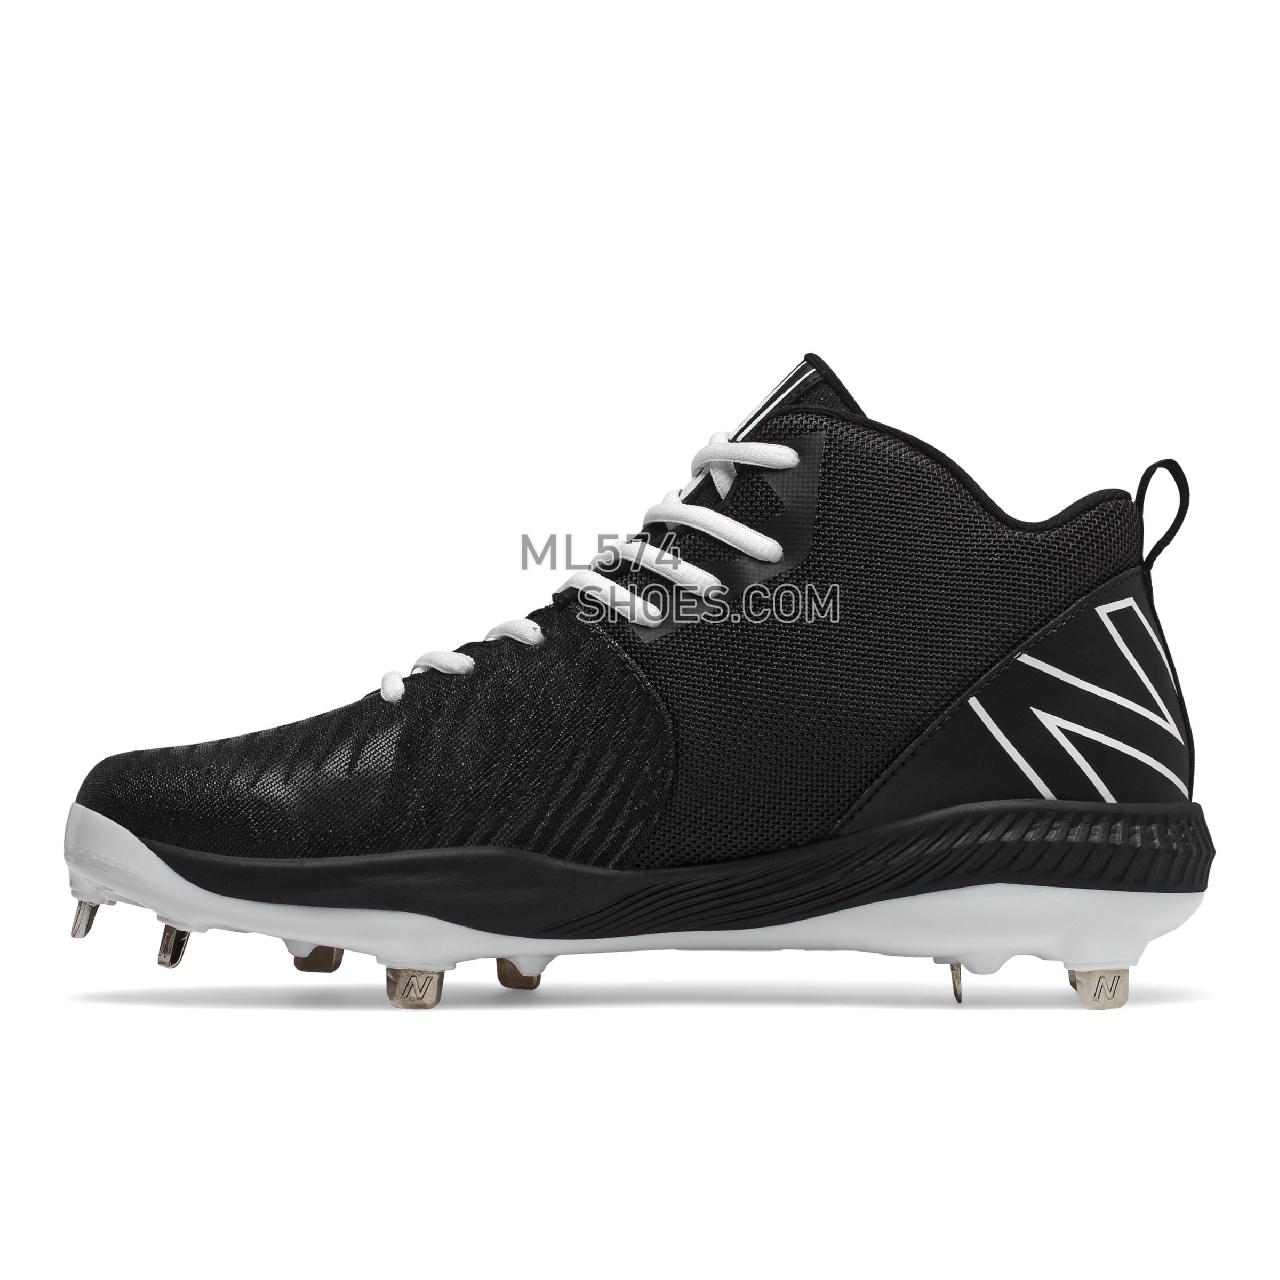 New Balance FuelCell 4040 v6 Mid-Metal - Men's Mid-Cut Baseball Cleats - Black with White - M4040BK6